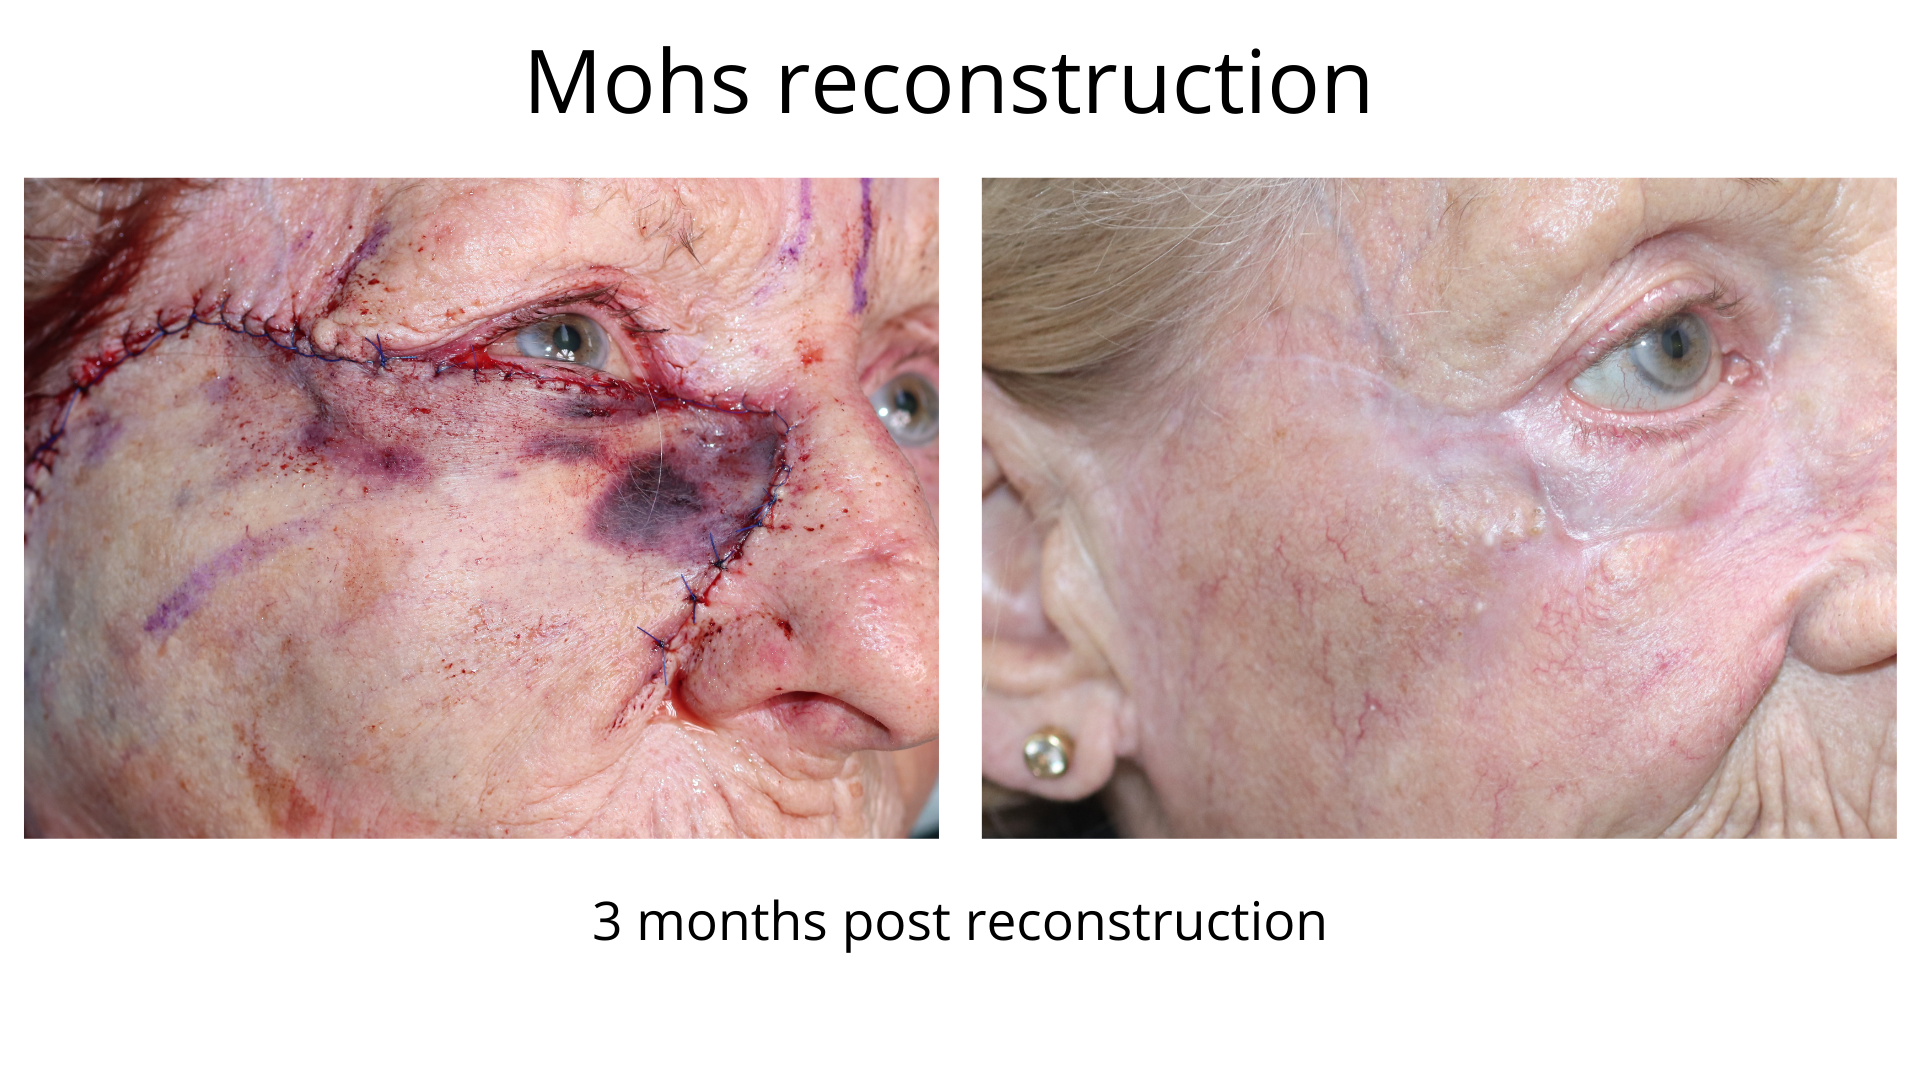 Before and after Mohs reconstruction surgery performed by Dr Anthony Maloof in Sydney.